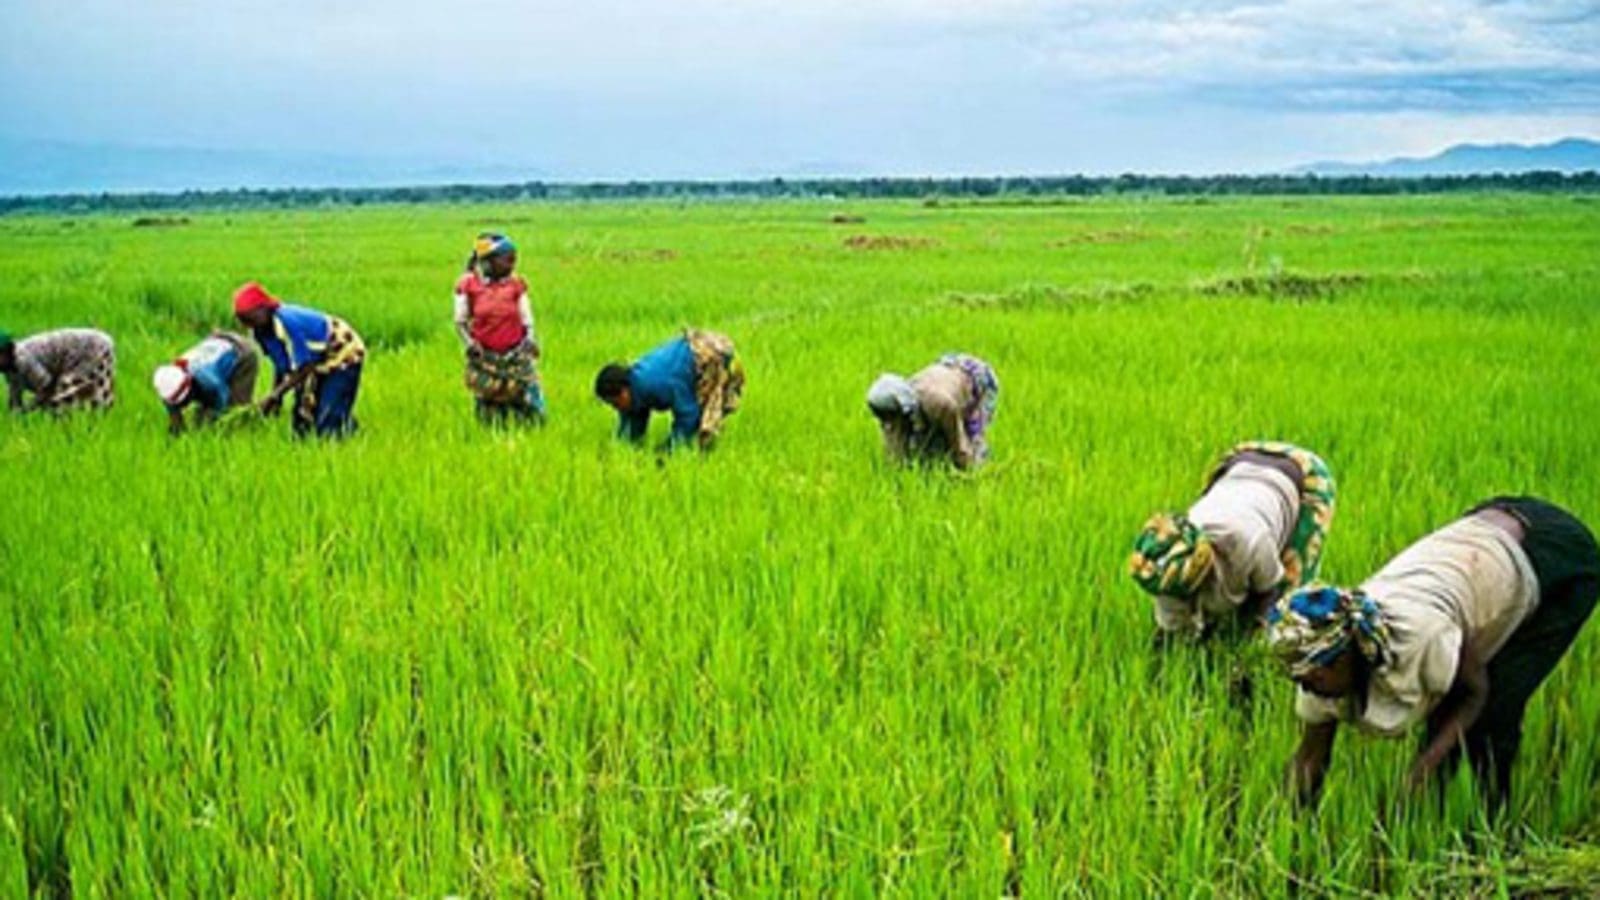 Rice farmers in West Africa to benefit from training aimed at bolstering self-sufficiency